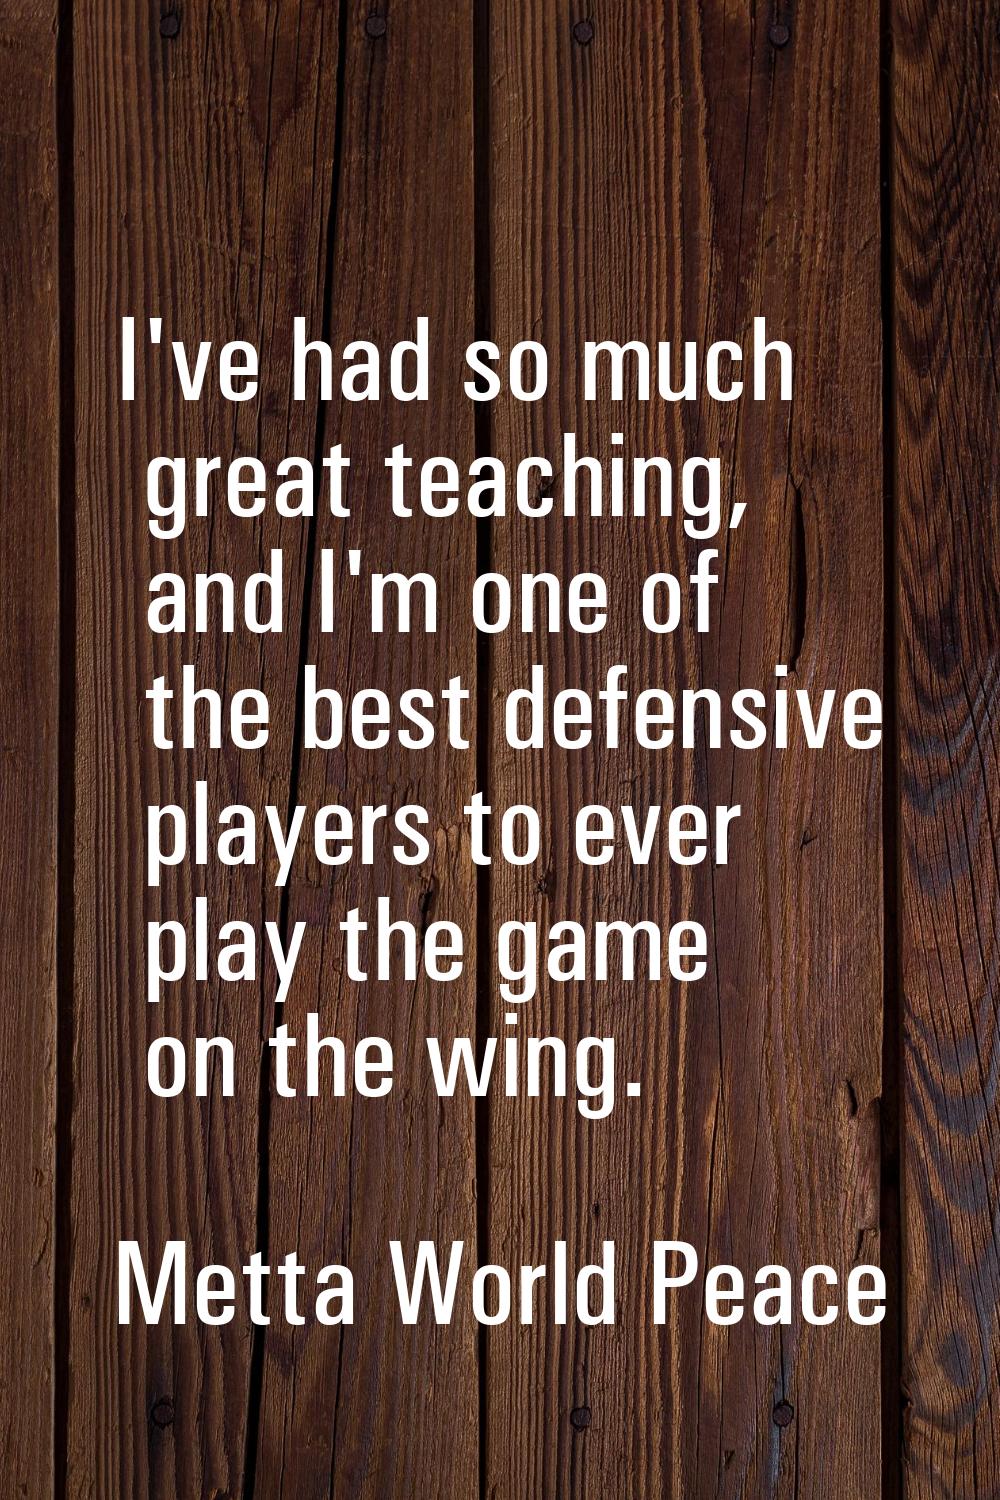 I've had so much great teaching, and I'm one of the best defensive players to ever play the game on